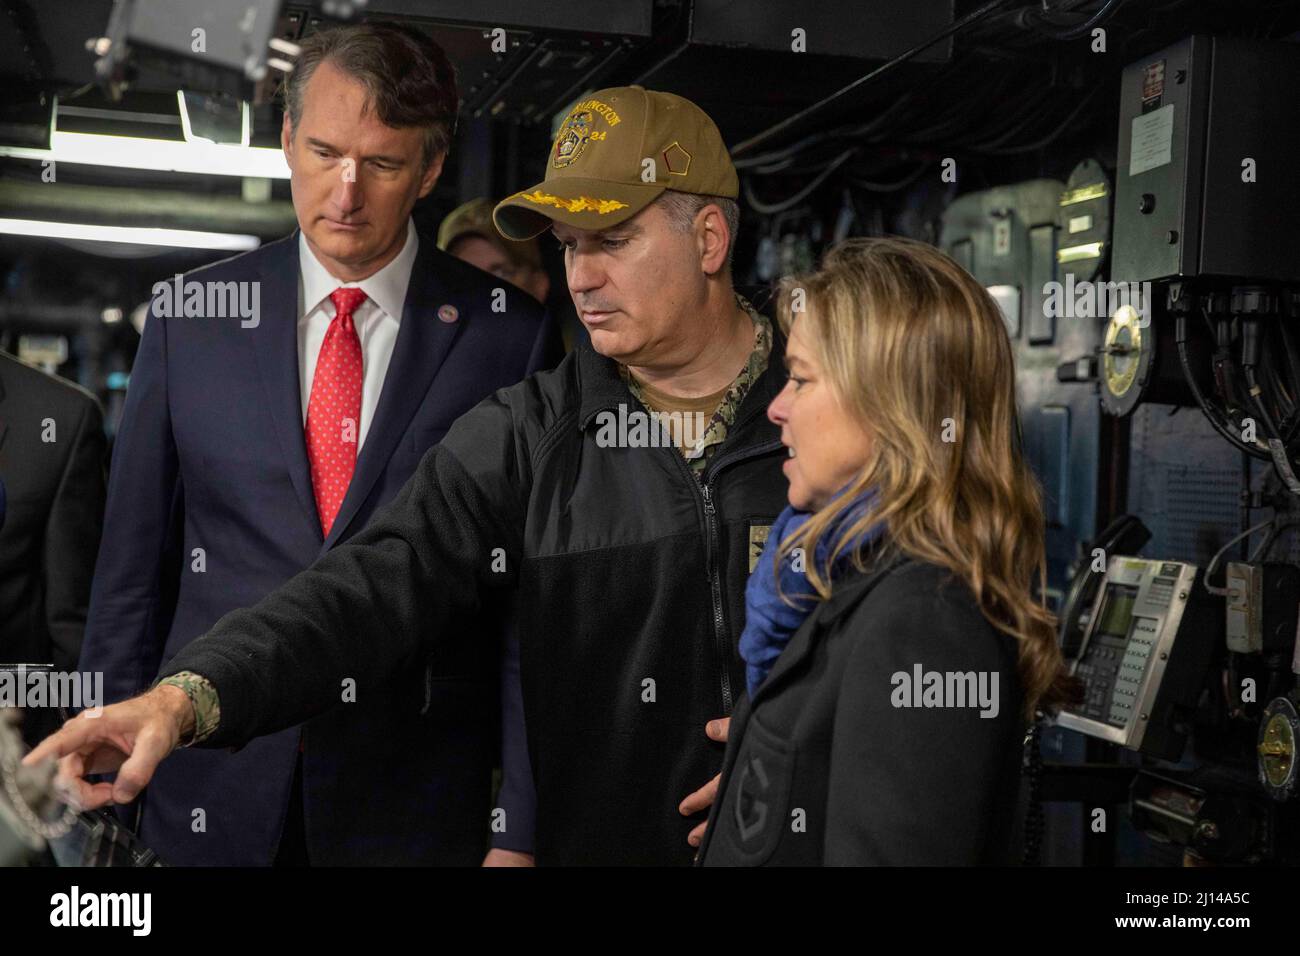 Norfork, United States. 20 March, 2022. U.S. Navy Capt. Eric Kellum, commanding officer of USS Arlington, center, shows Virginia Governor Glenn Youngkin, left, and wife, Suzanne Youngkin, the instruments in the pilot house of the San Antonio-class amphibious transport dock ship, March 20, 2022 Norfork, Virginia. Youngkin came to speak to the sailors and marines before their deployment with the Kearsarge Amphibious Ready Group.  Credit: MCS Keith Nowak/US Navy/Alamy Live News Stock Photo